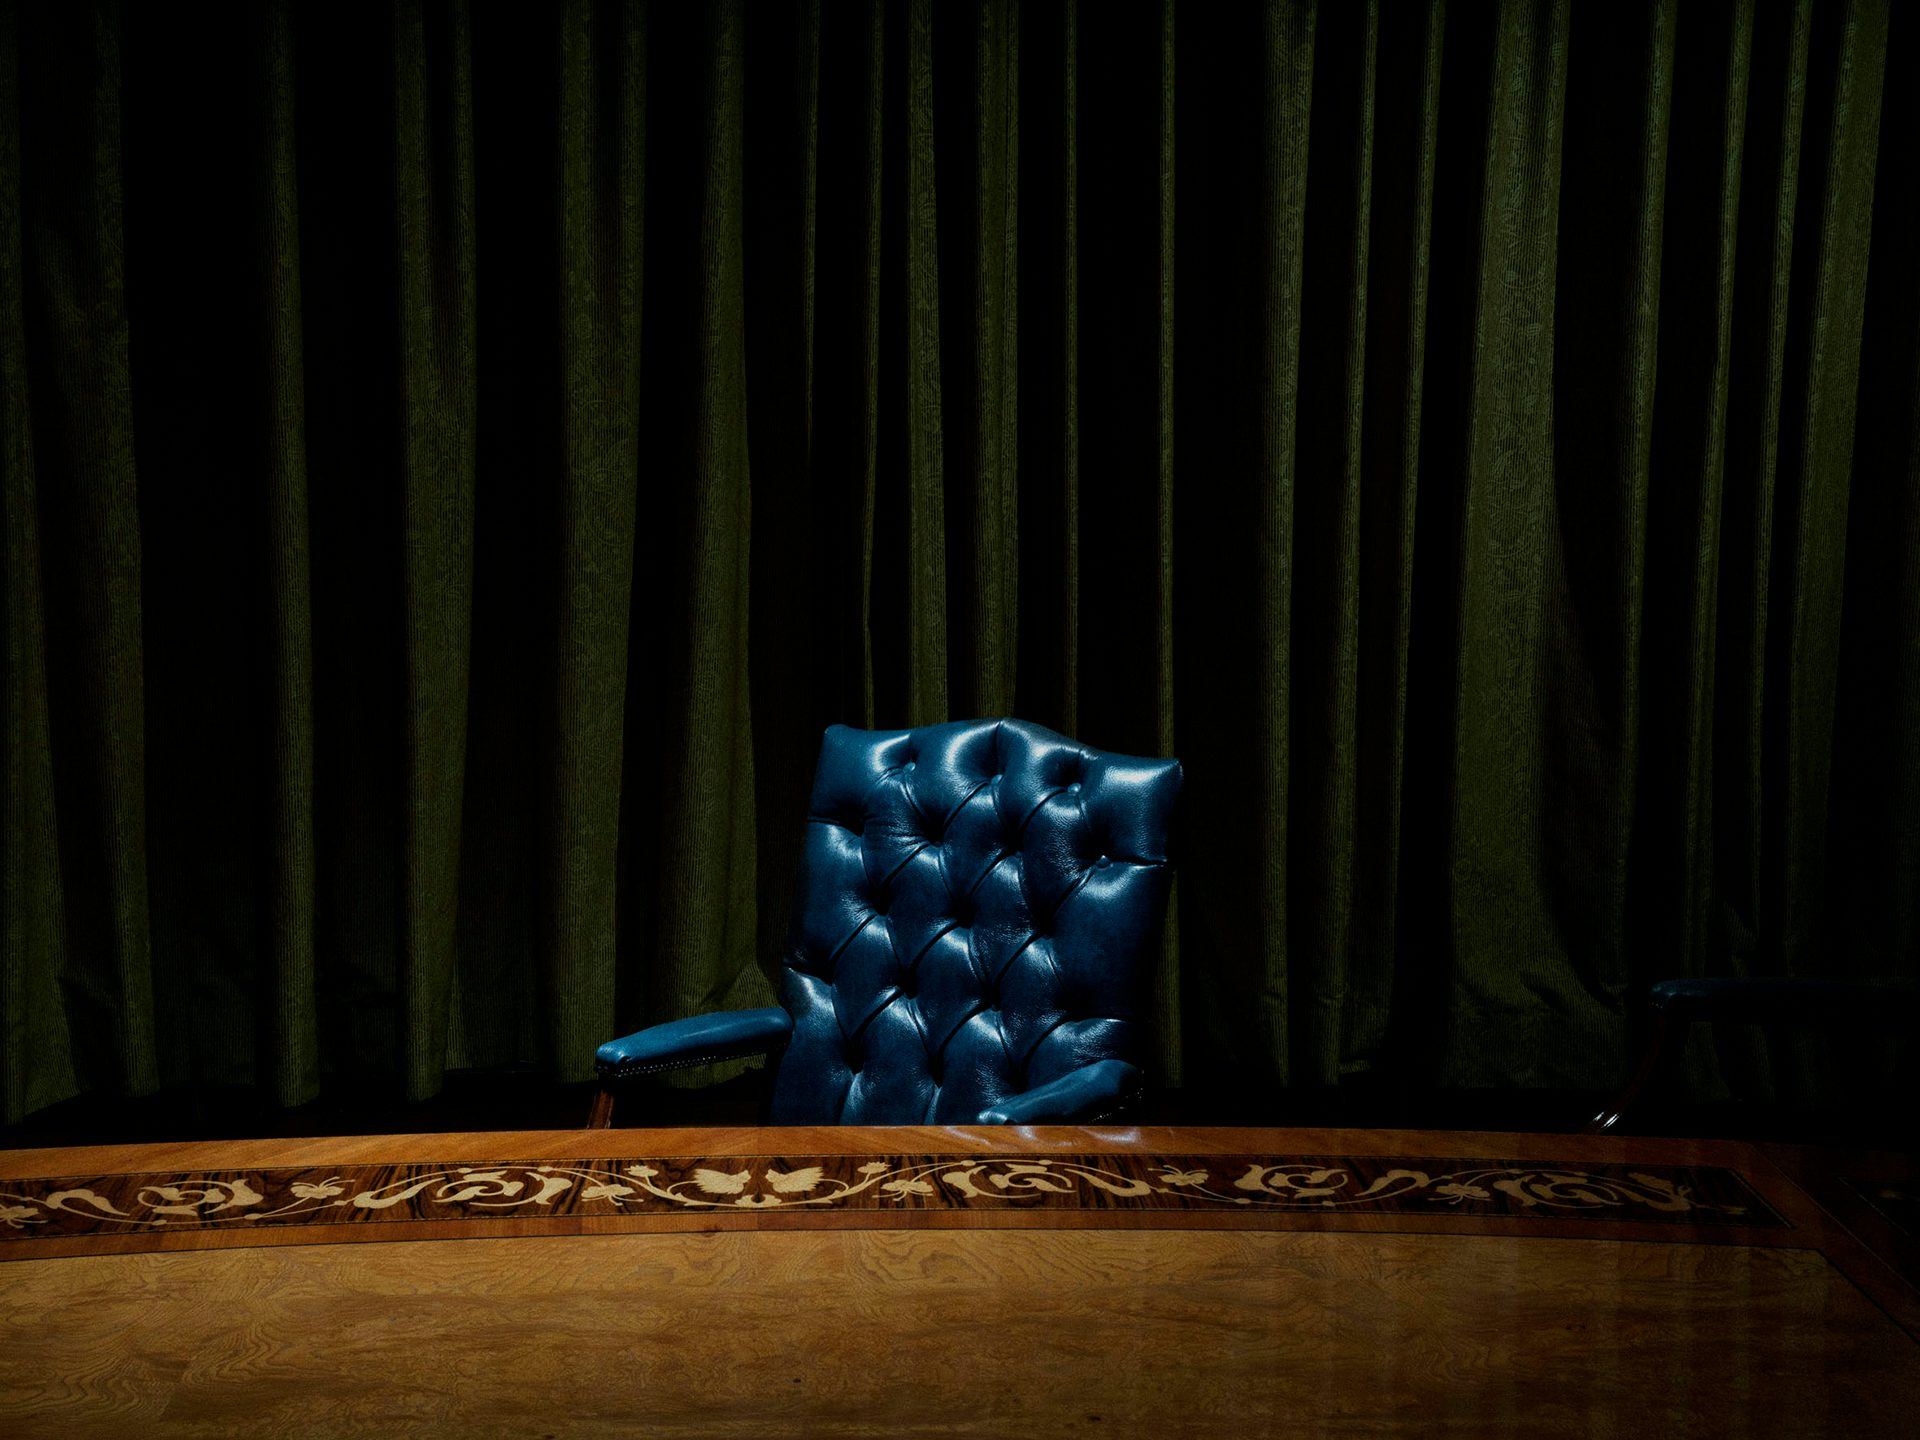 Photograph of a blue chair by Magnum photographer Alex Majoli